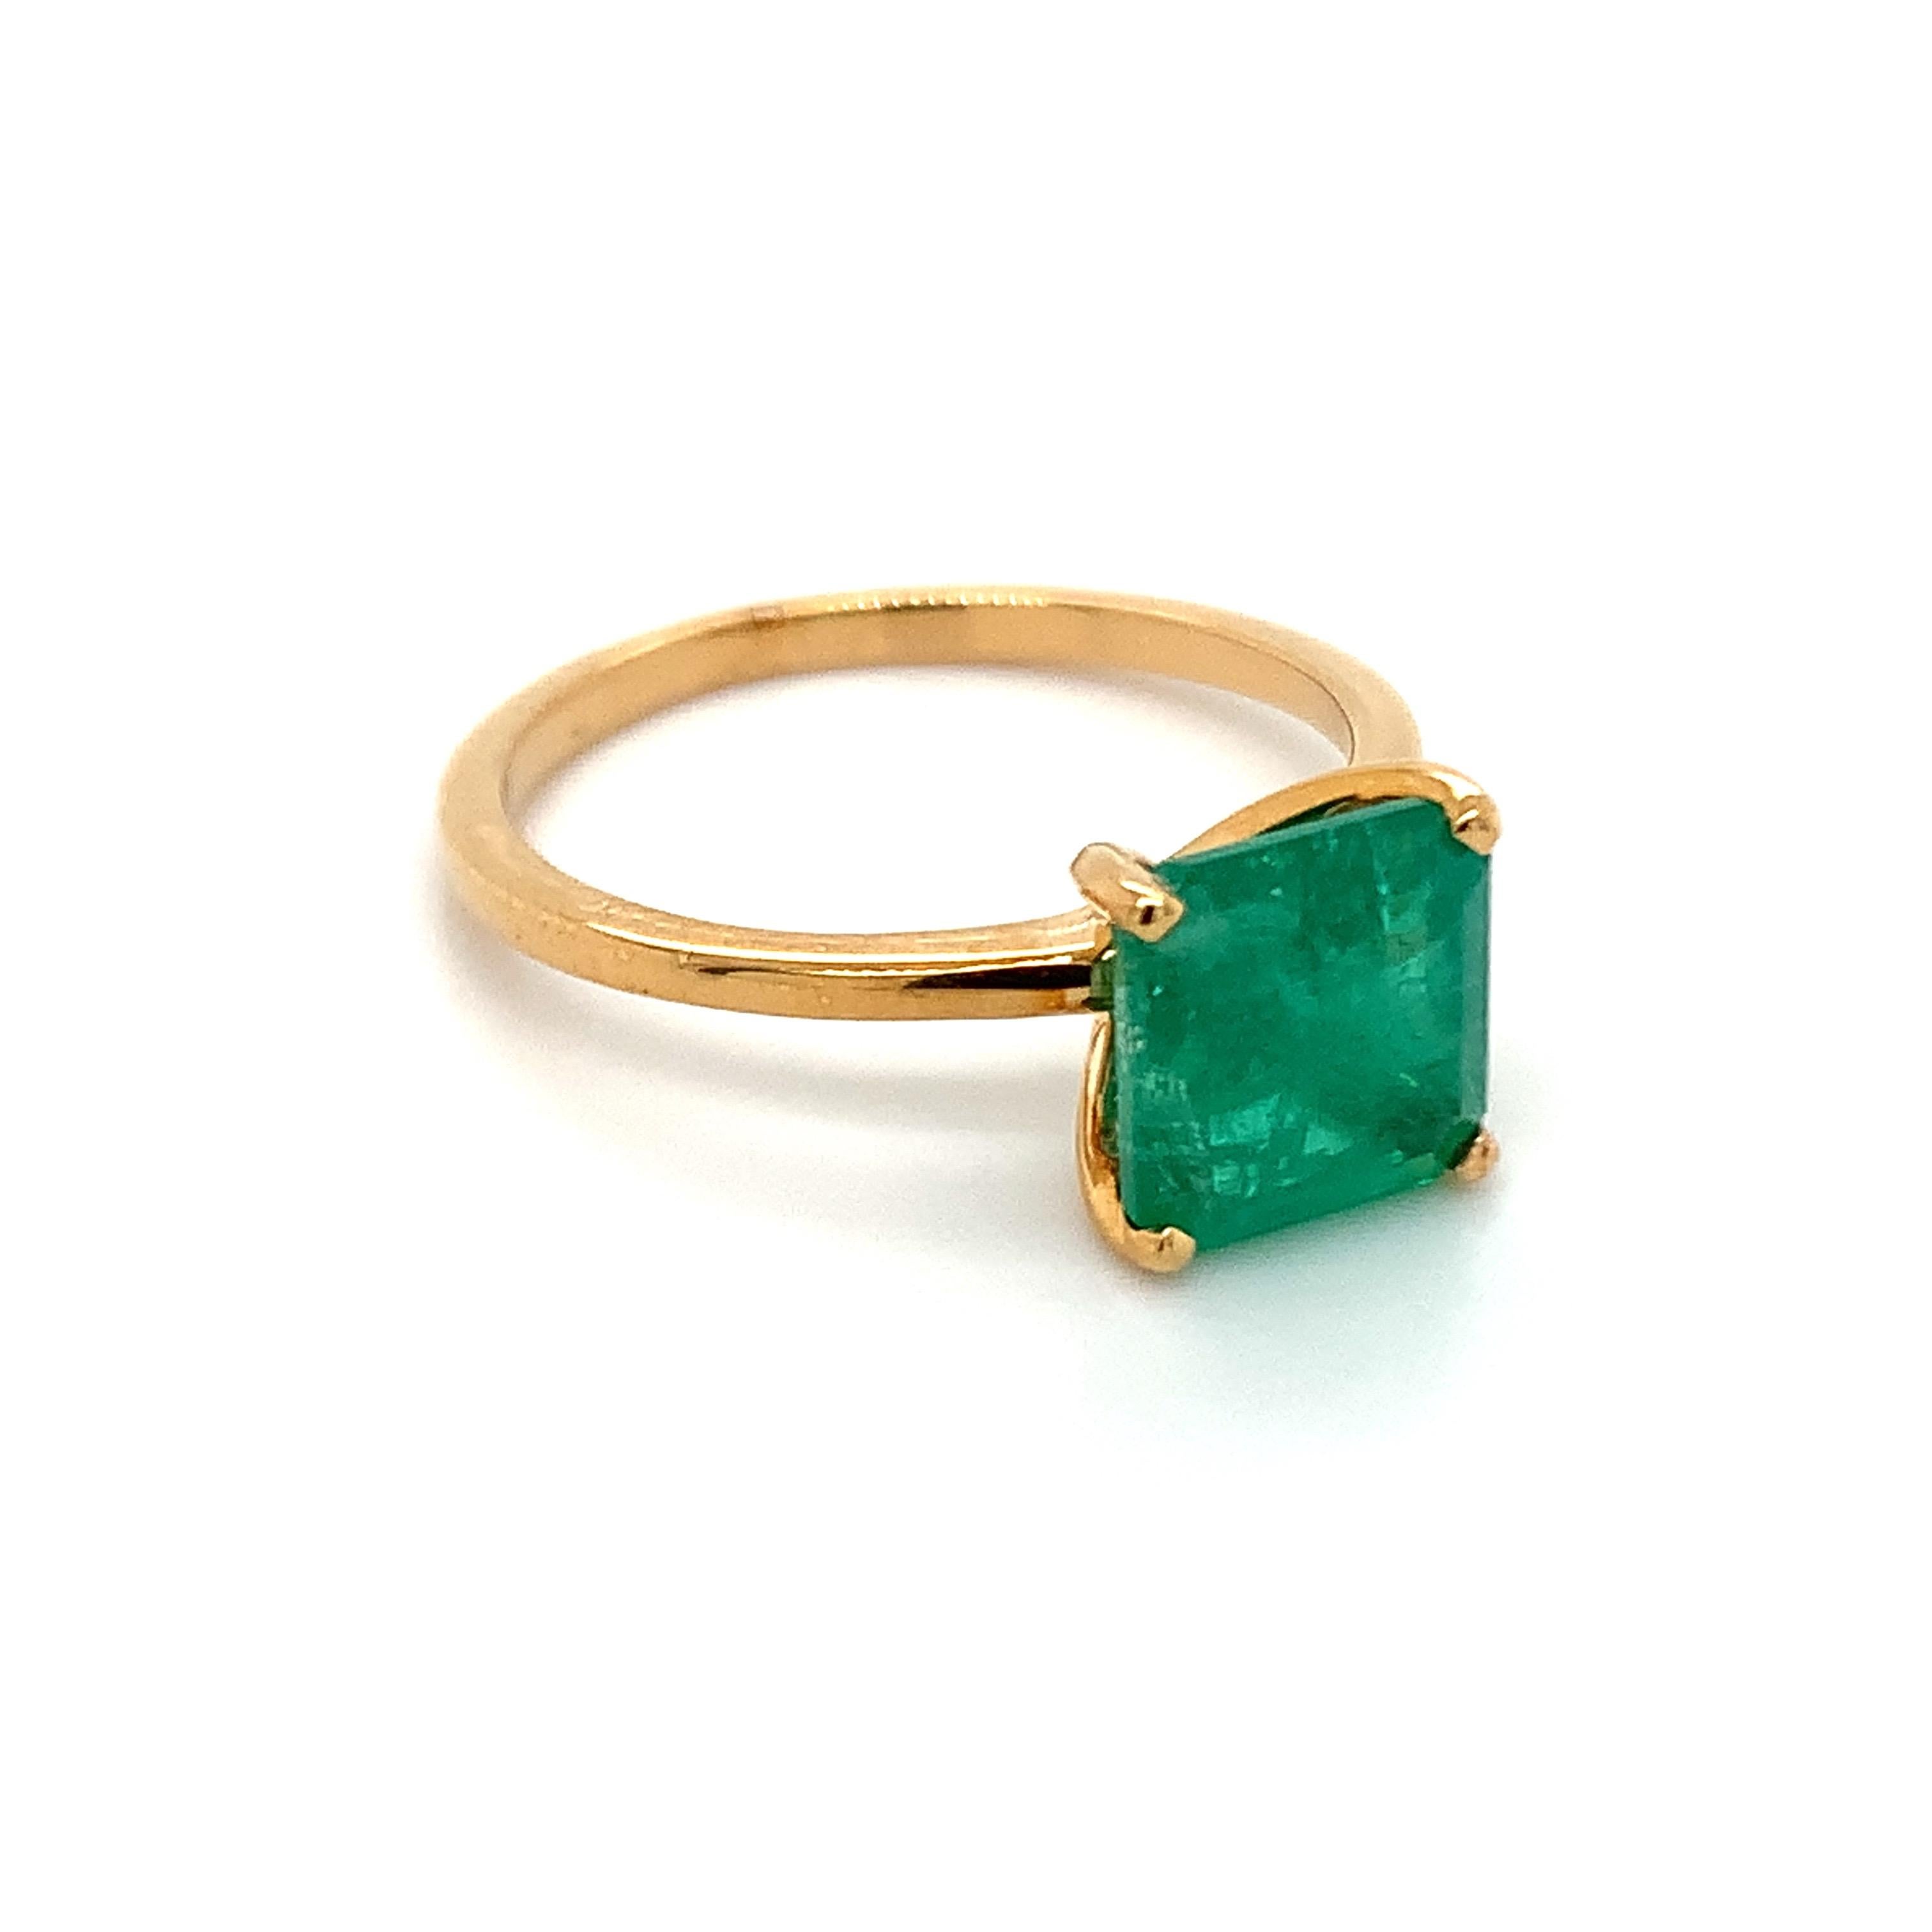 Octagon cut emerald gemstone beautifully crafted in a 10K yellow gold ring.

With a vibrant green color hue. The birthstone for May is a symbol of renewed spring growth. Explore a vast range of precious stone Jewelry in our store. 

Centre stone is